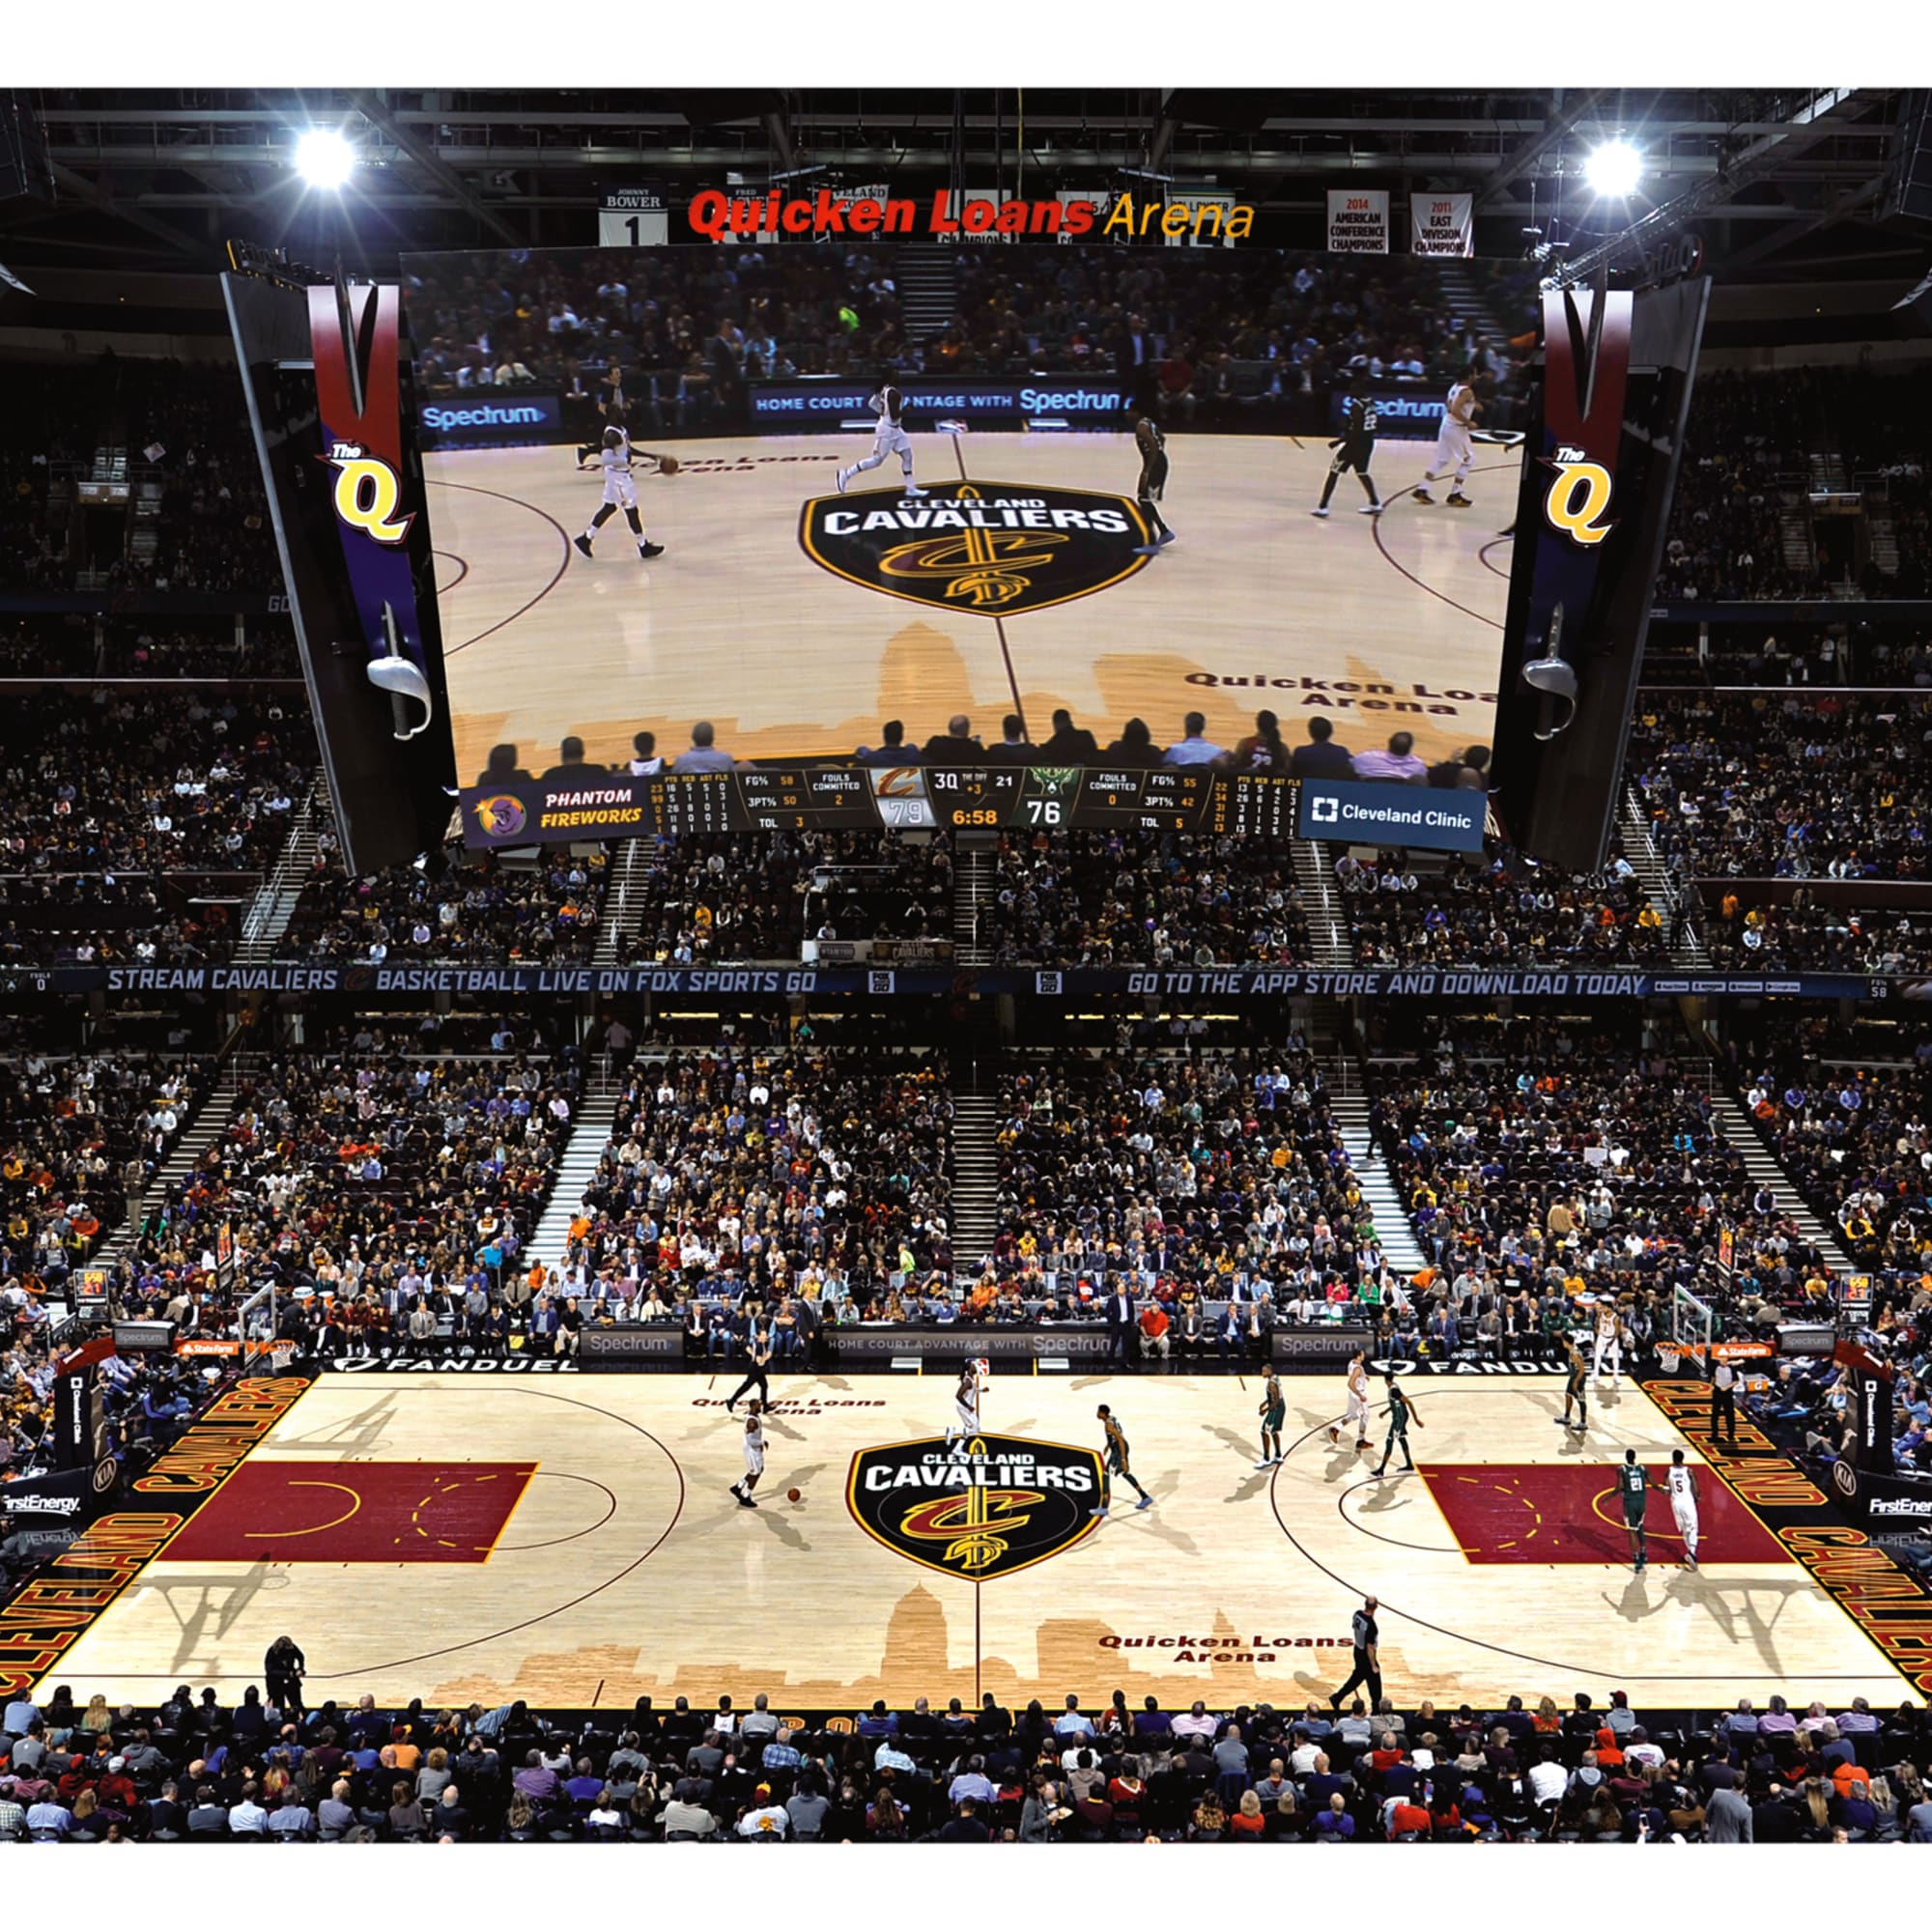 Cleveland Cavs NBA Rally Towel WHATEVER IT TAKES Stadium Arena Fan Gear.  10x16"